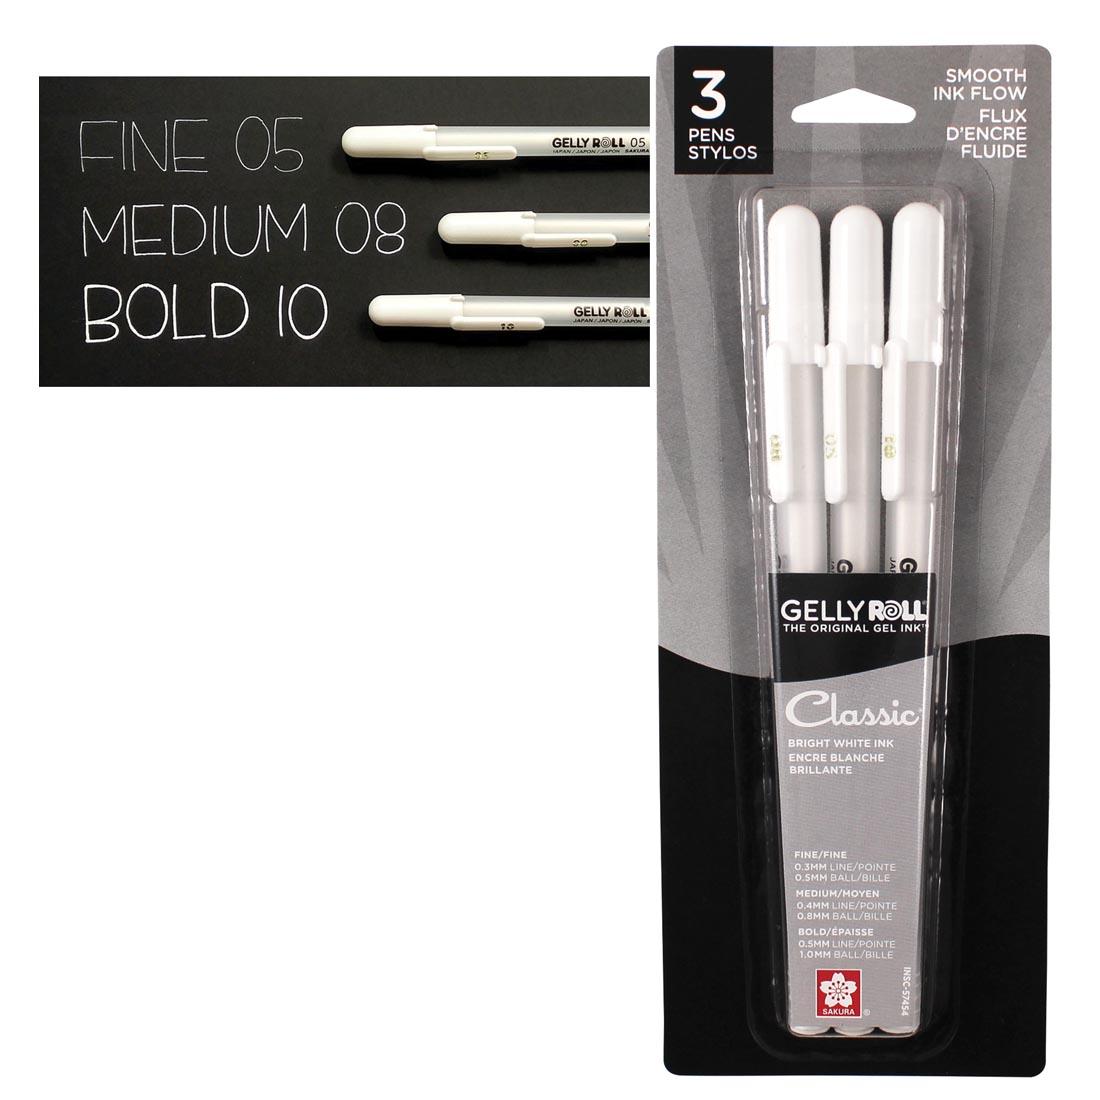 Sakura Gelly Roll Classic White Gel Pen Set Package beside the individual pens labeled with their size: Fine 05, Medium 08, Bold 10